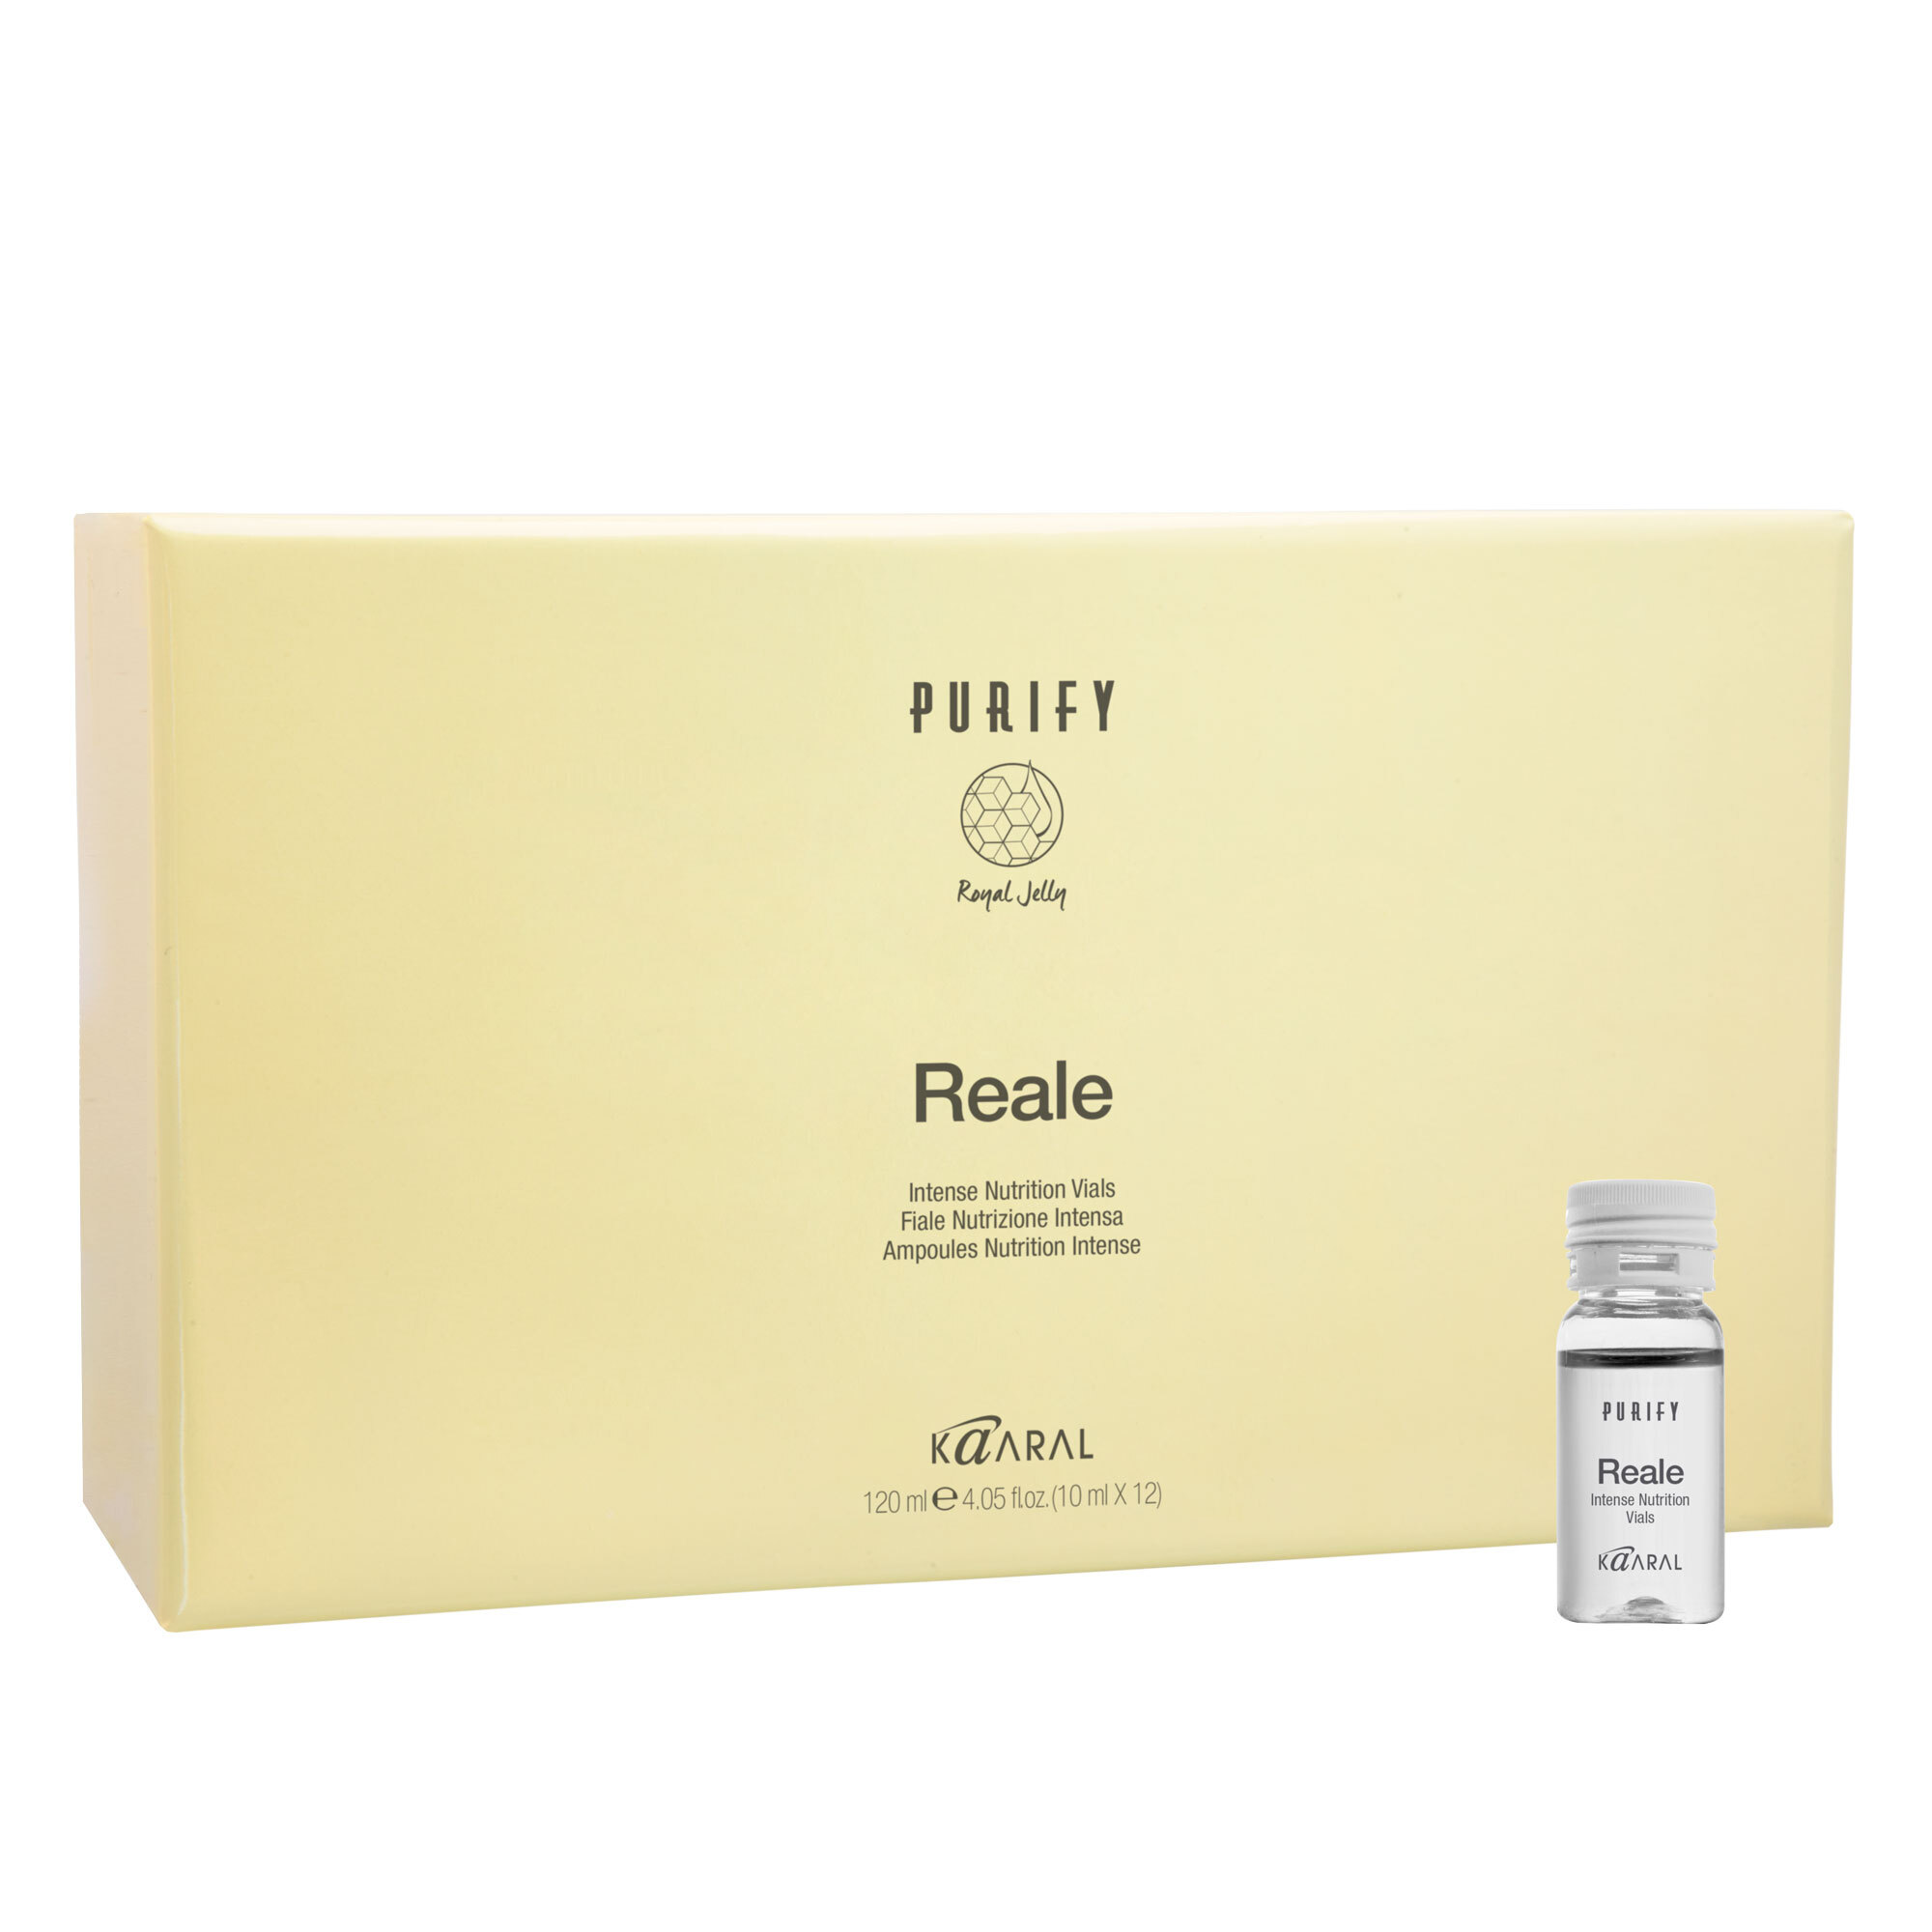 Kaaral Purify Reale Intense Treatment Box of 12 10ml Vials